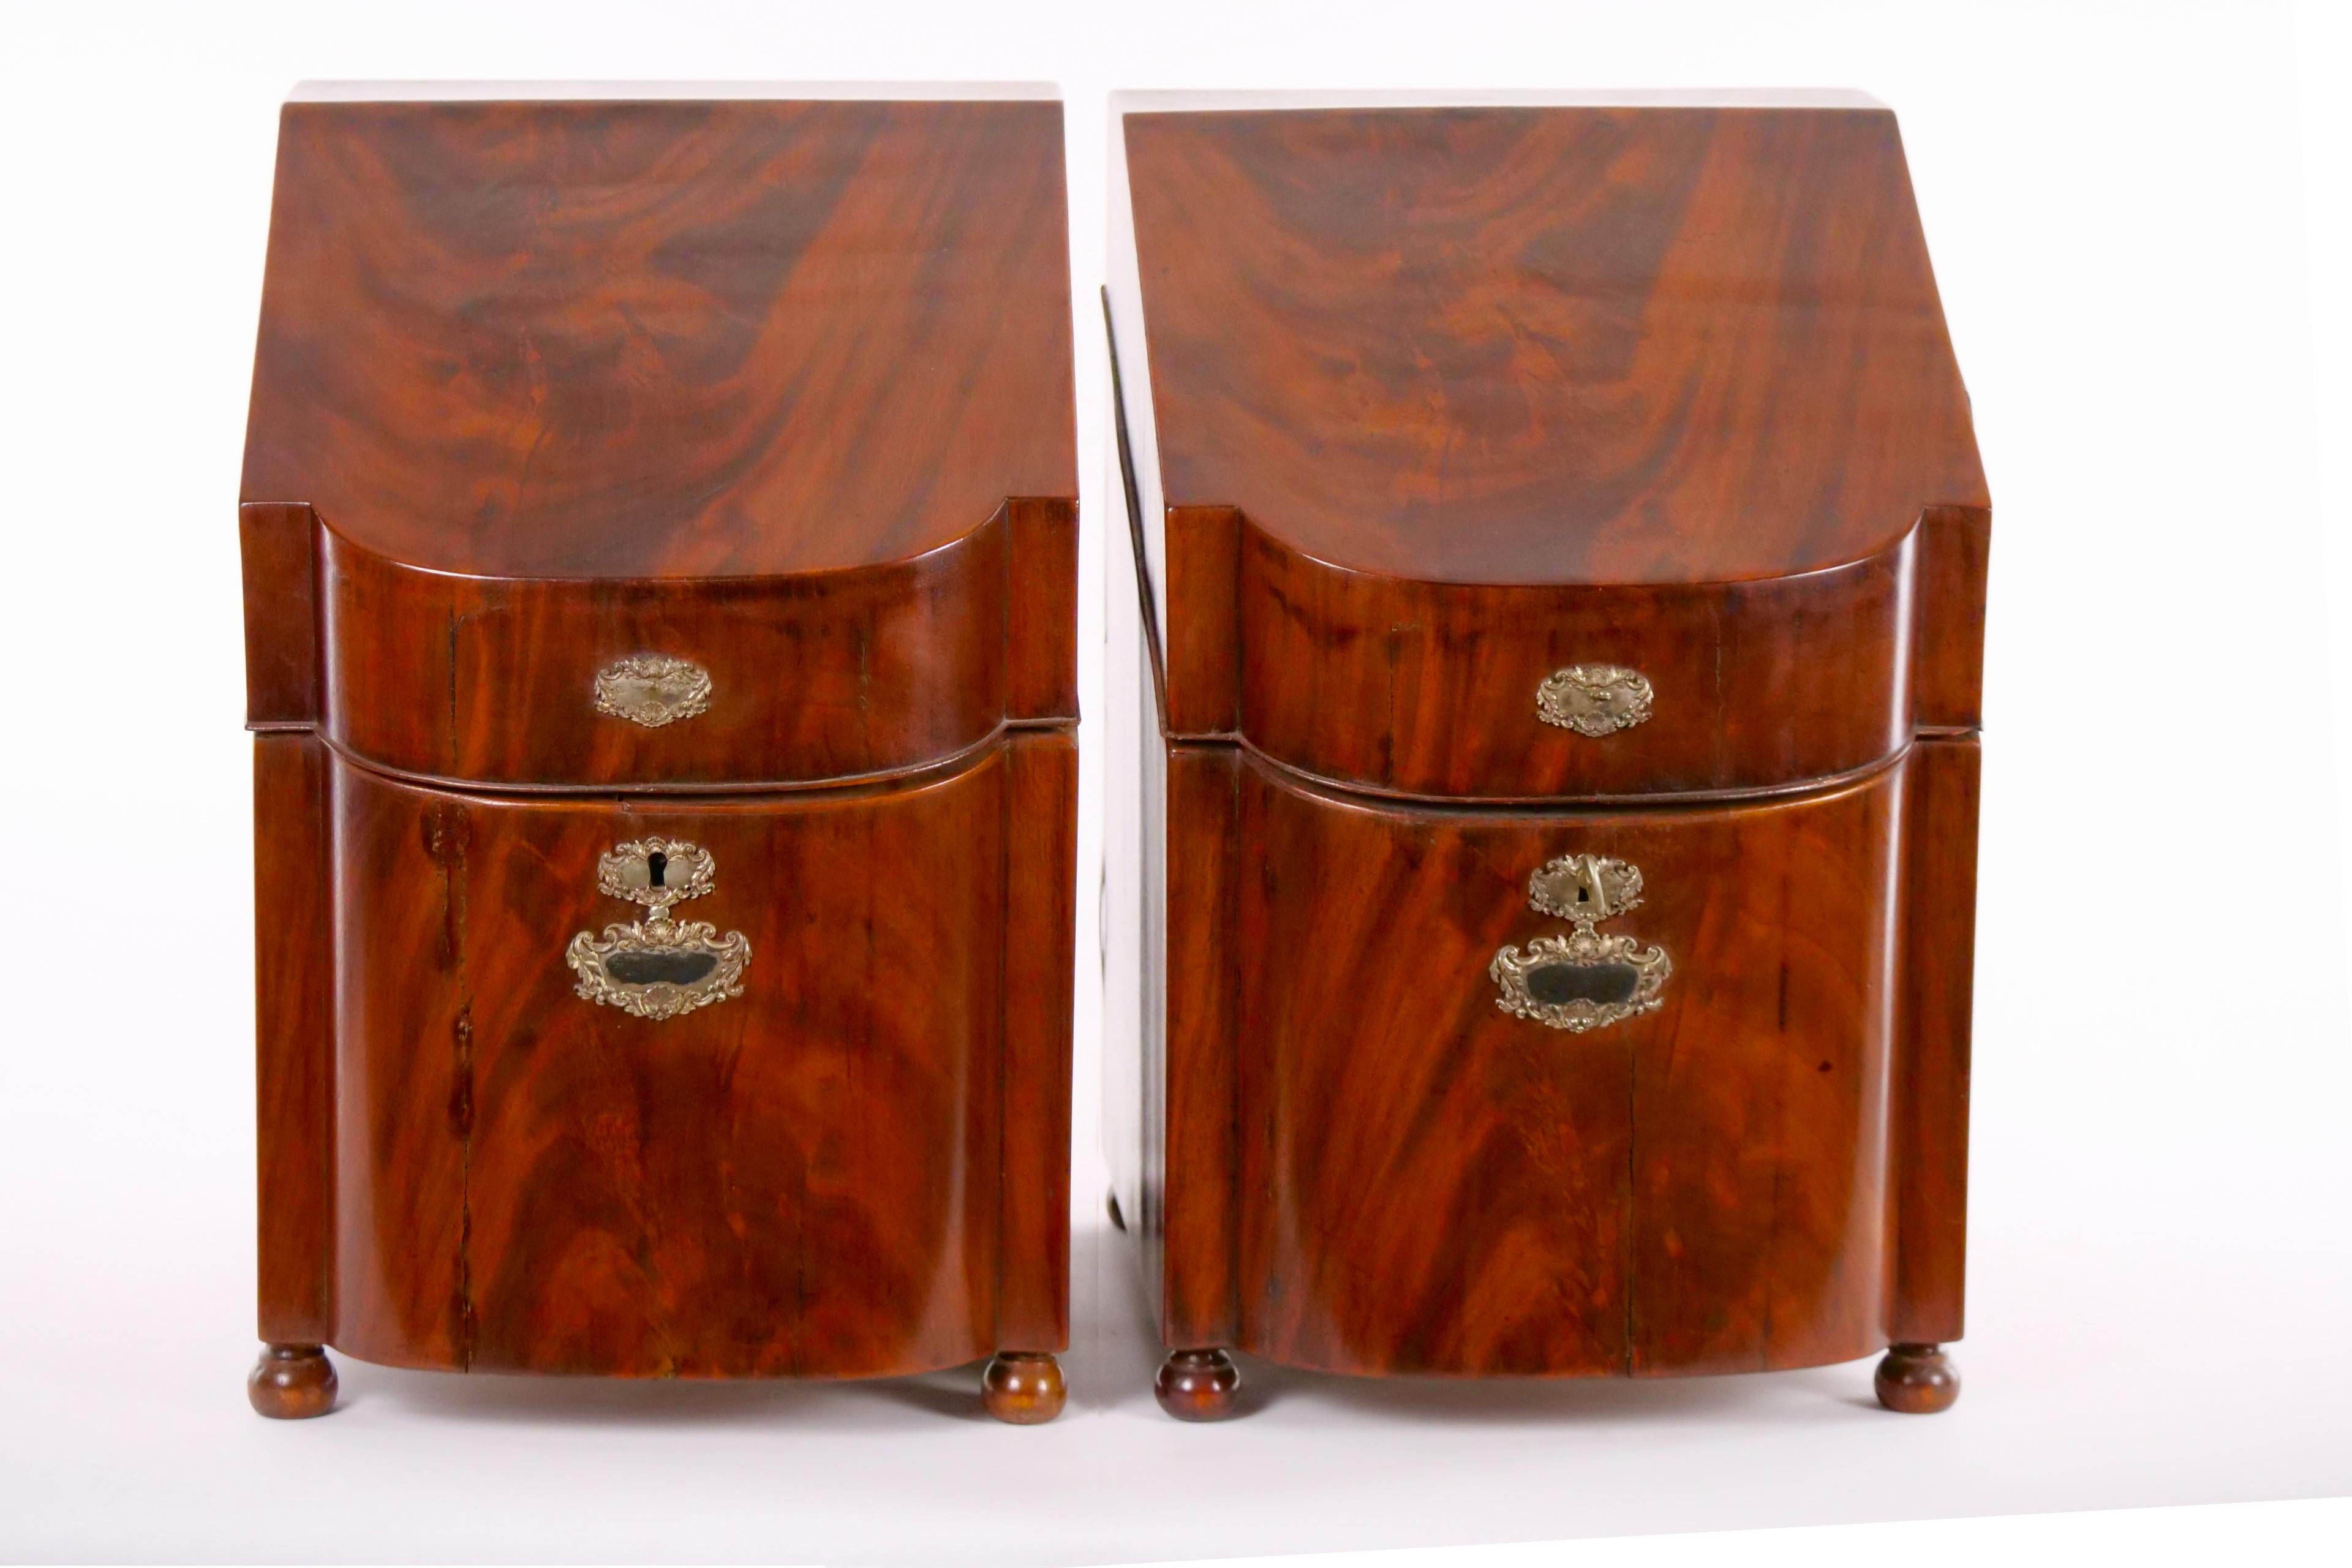 English mahogany wood Victorian style footed campaign cellarette / storage boxes. Impressive proportion and of a quality finish and appearance, displays a desirable aged patina and in good order with age appropriate wear consistent with use. Minor